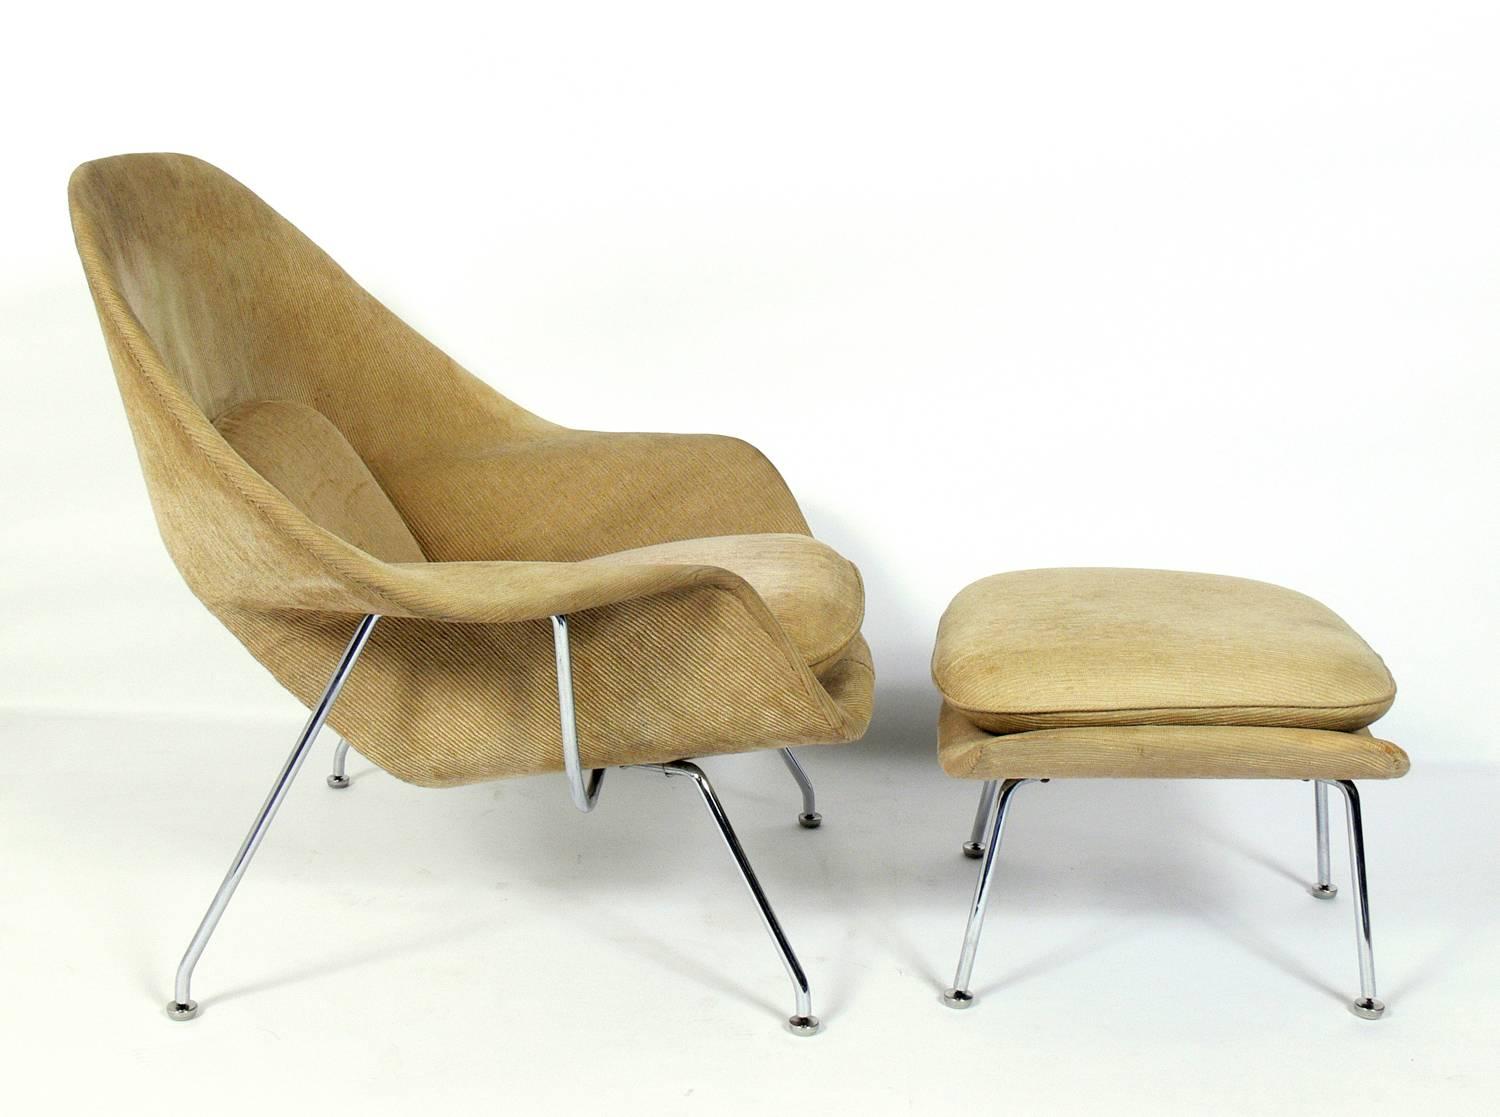 Womb chair and ottoman, designed by Eero Saarinen for knoll, American, circa 1960s. These items are currently being reupholstered. The price noted below includes reupholstery in your fabric. The ottoman measures 16